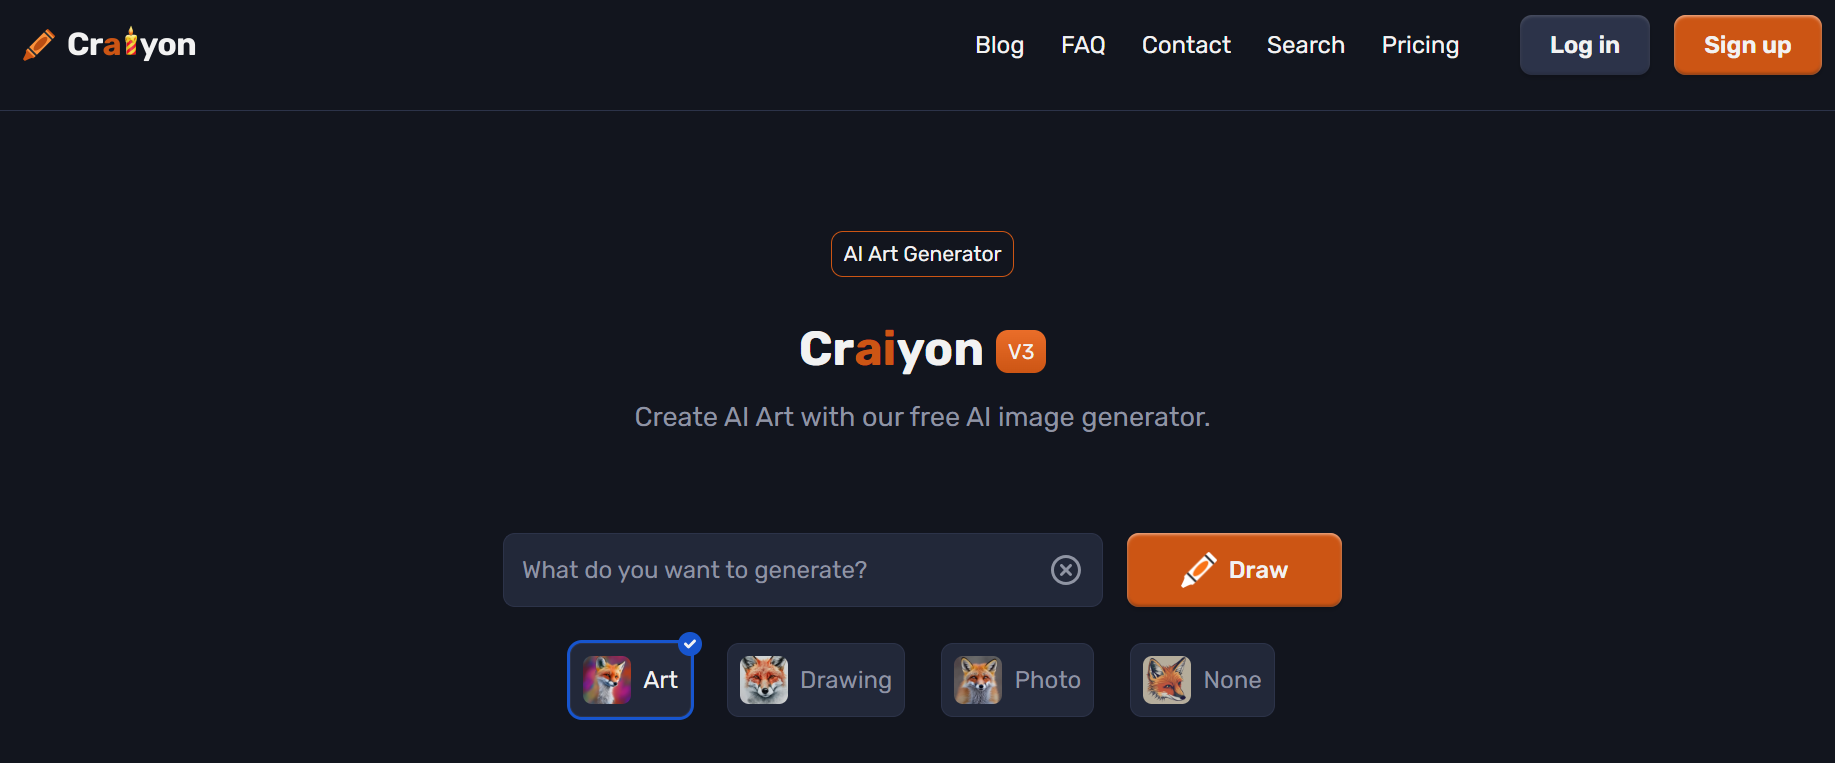 How To Use Craiyon AI?